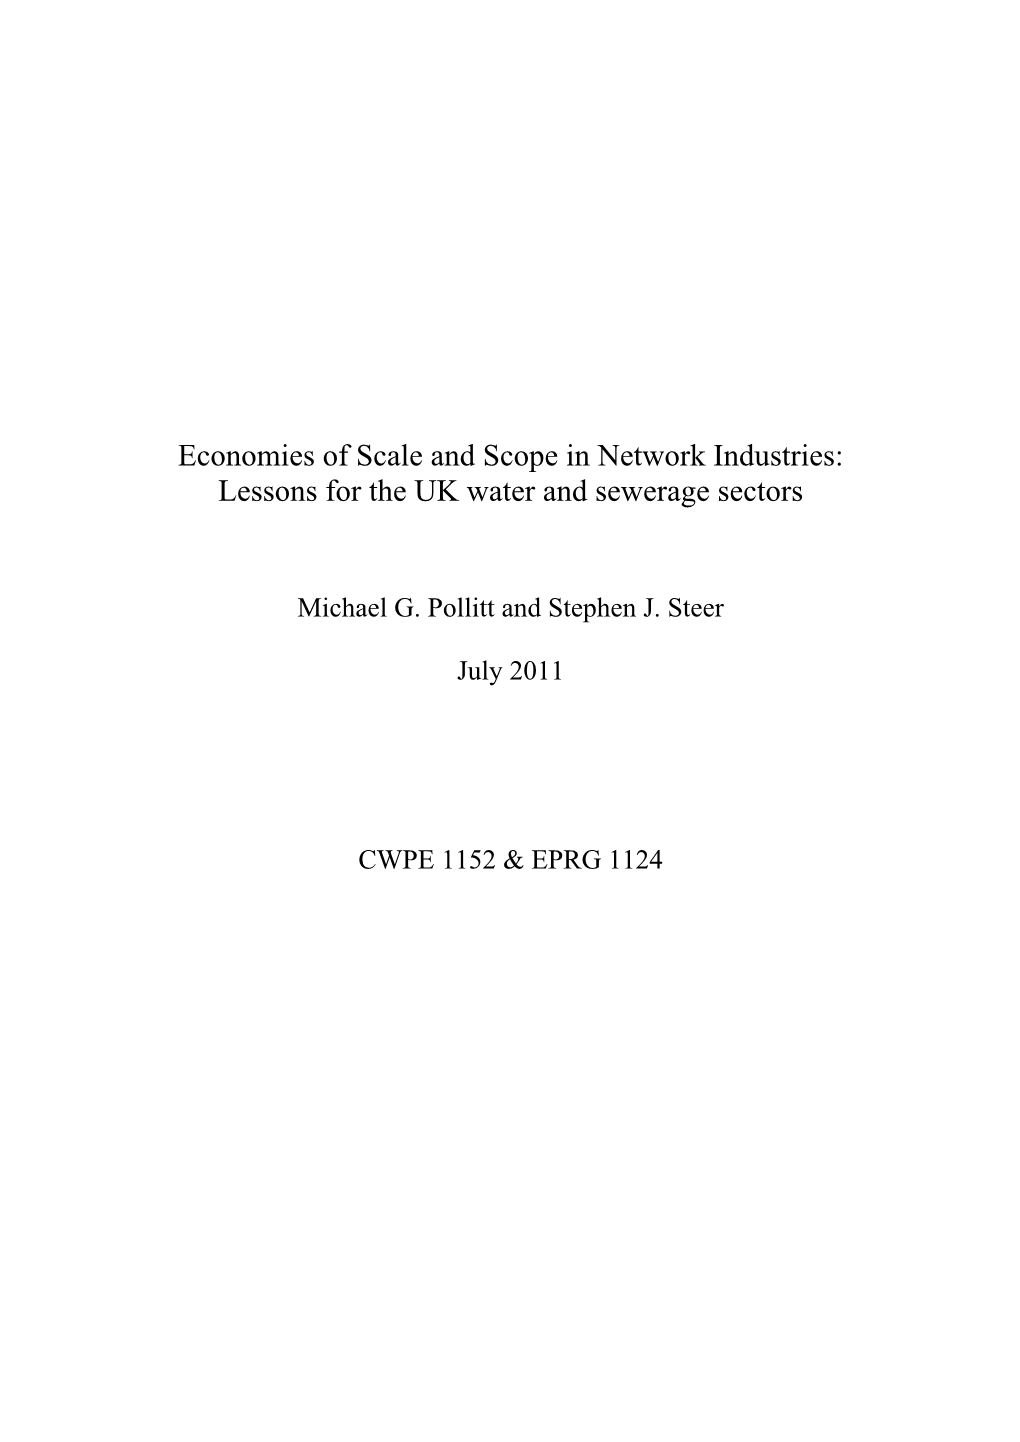 Economies of Scale and Scope in Network Industries: Lessons for the UK Water and Sewerage Sectors